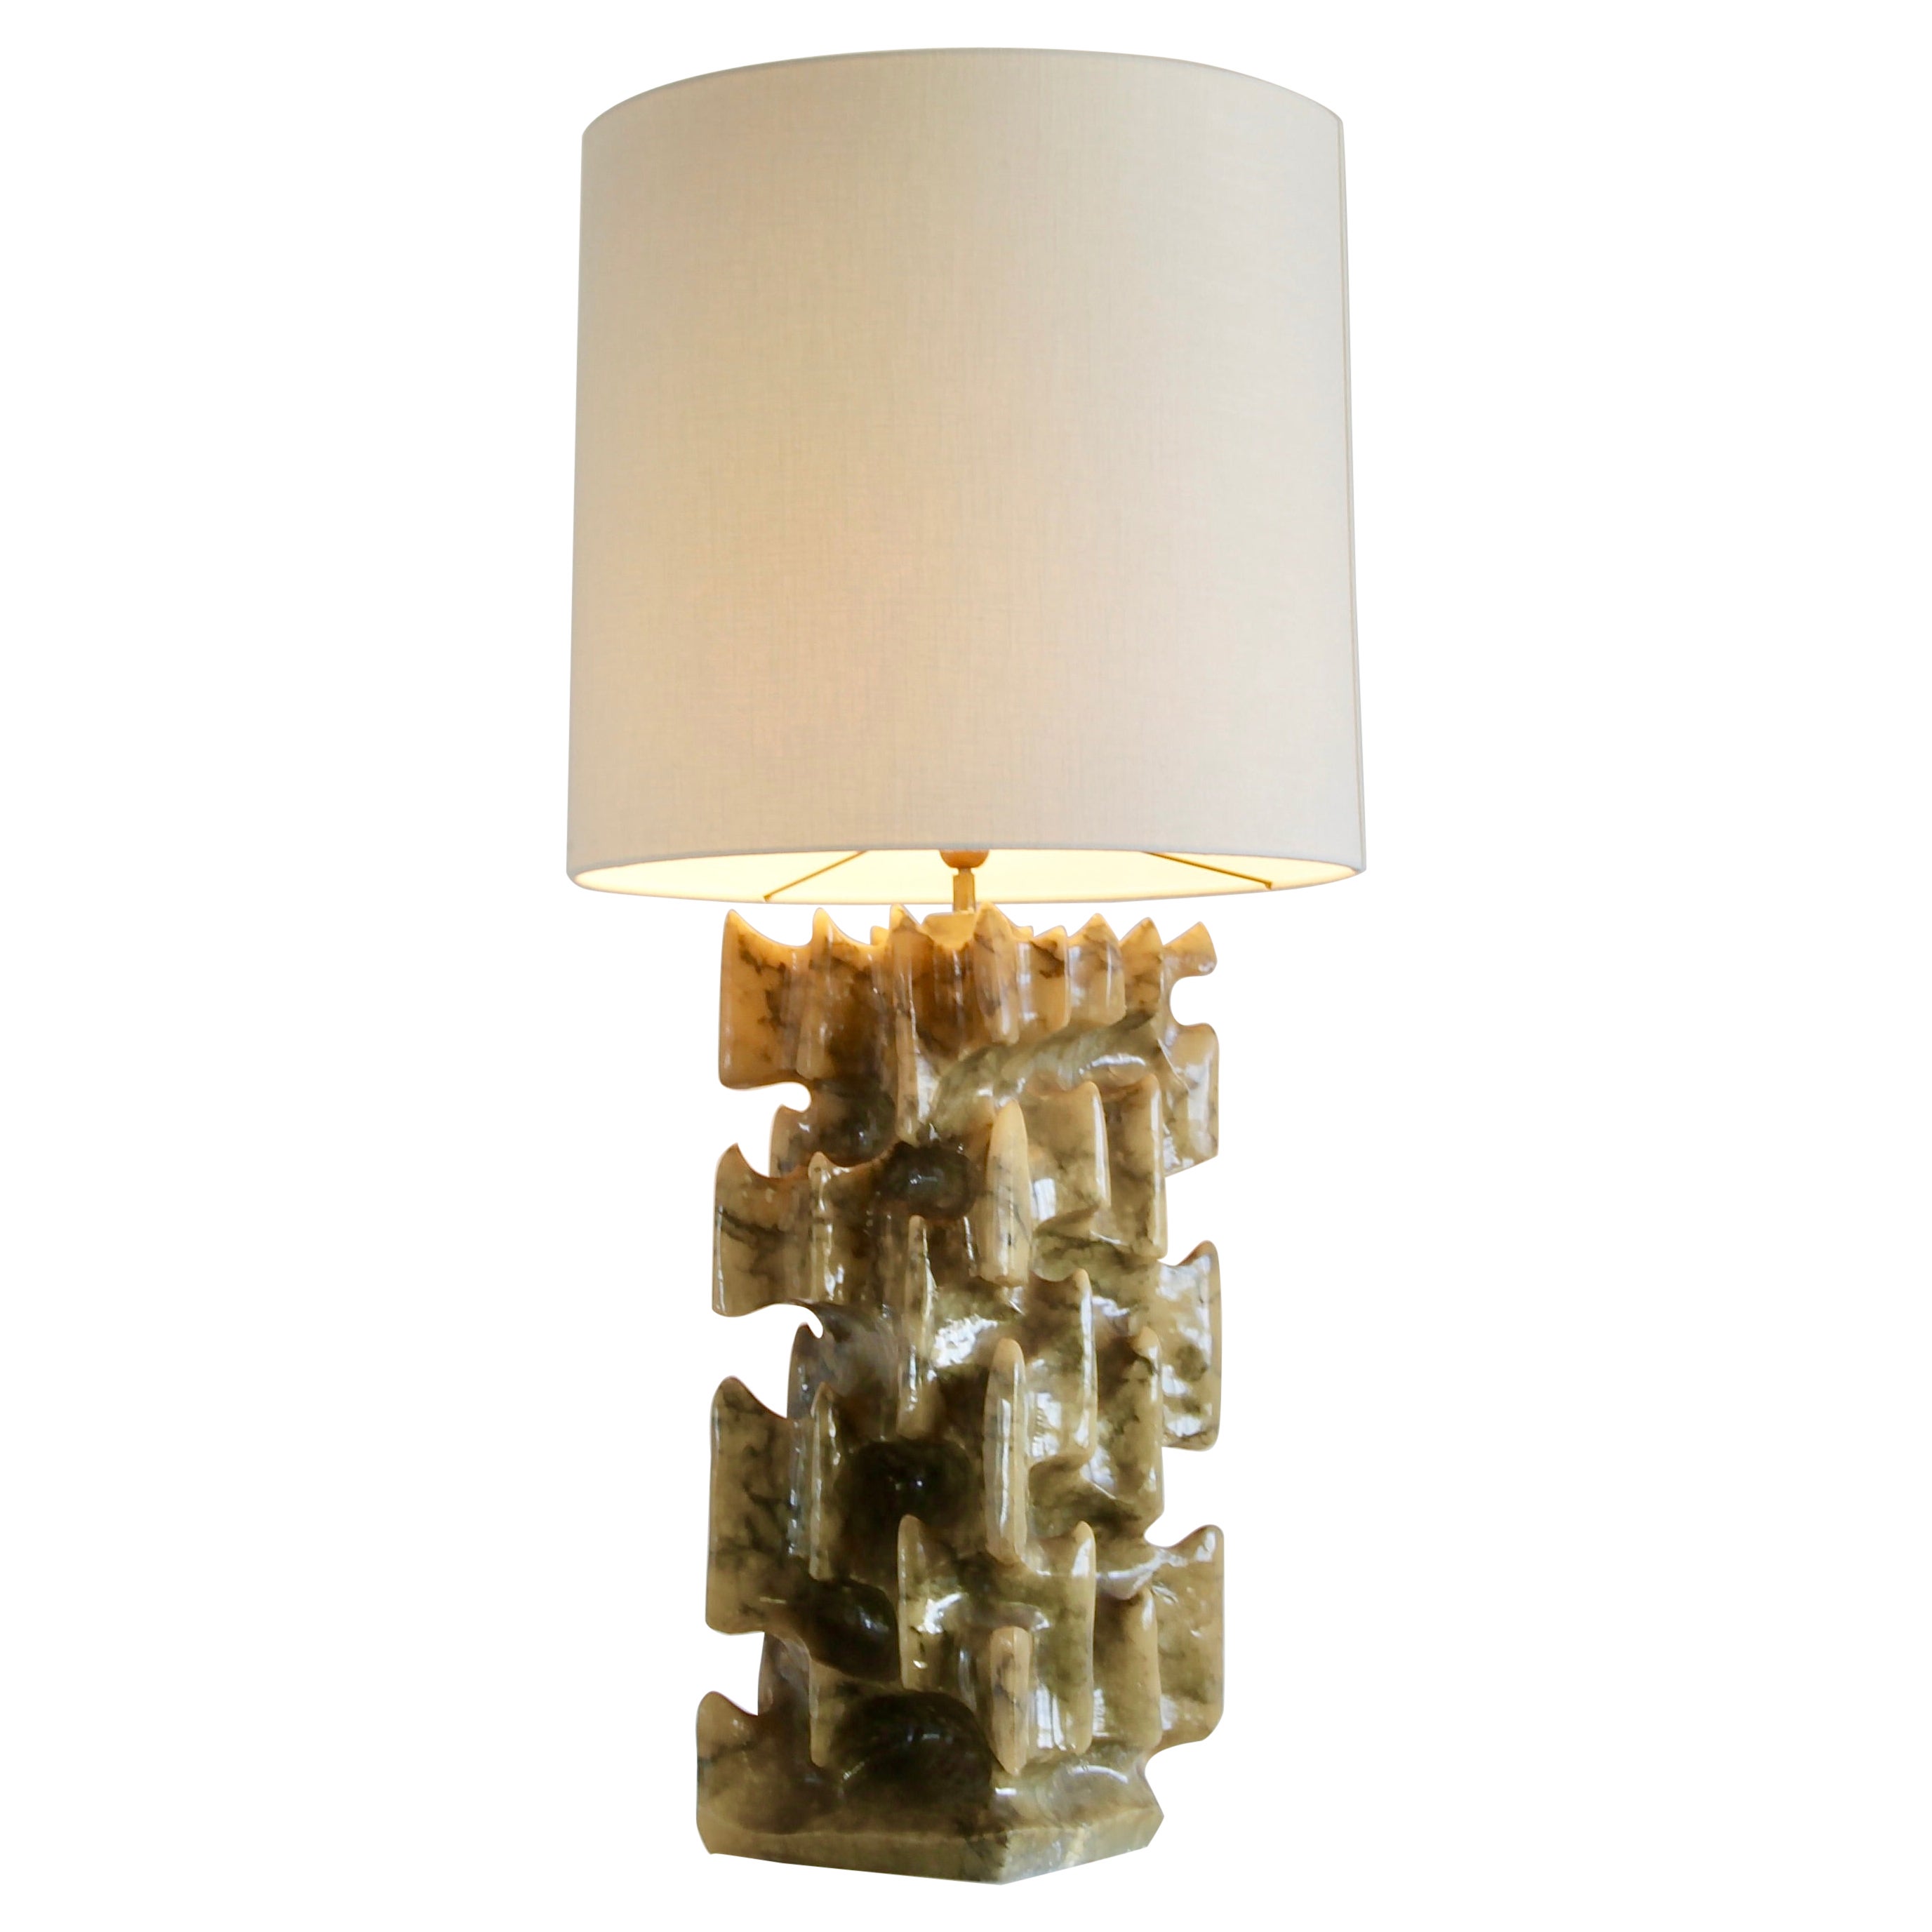 Unique Large Carved Alabaster Table Lamp, 1960s/1970s, Italy